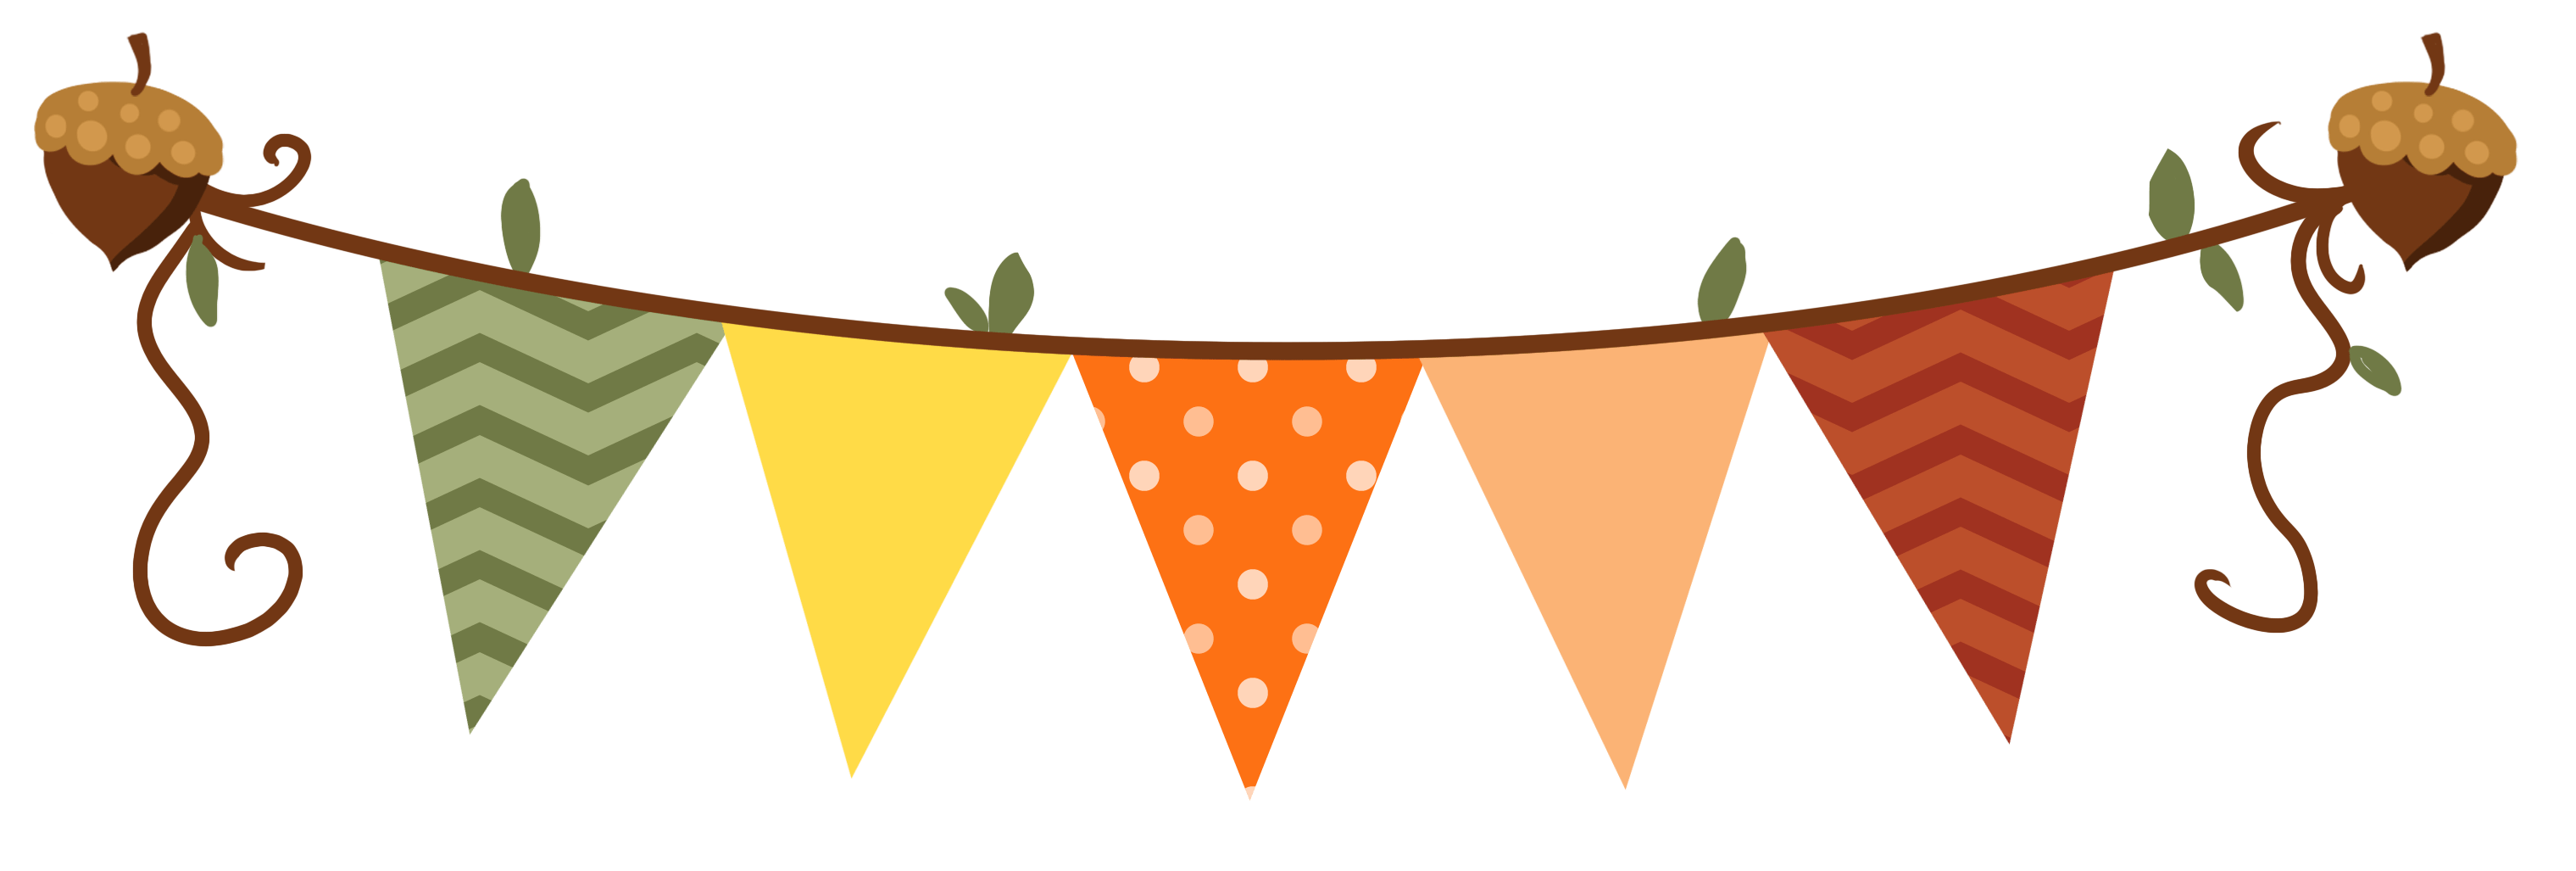 Fall clipart bunting, Fall bunting Transparent FREE for.